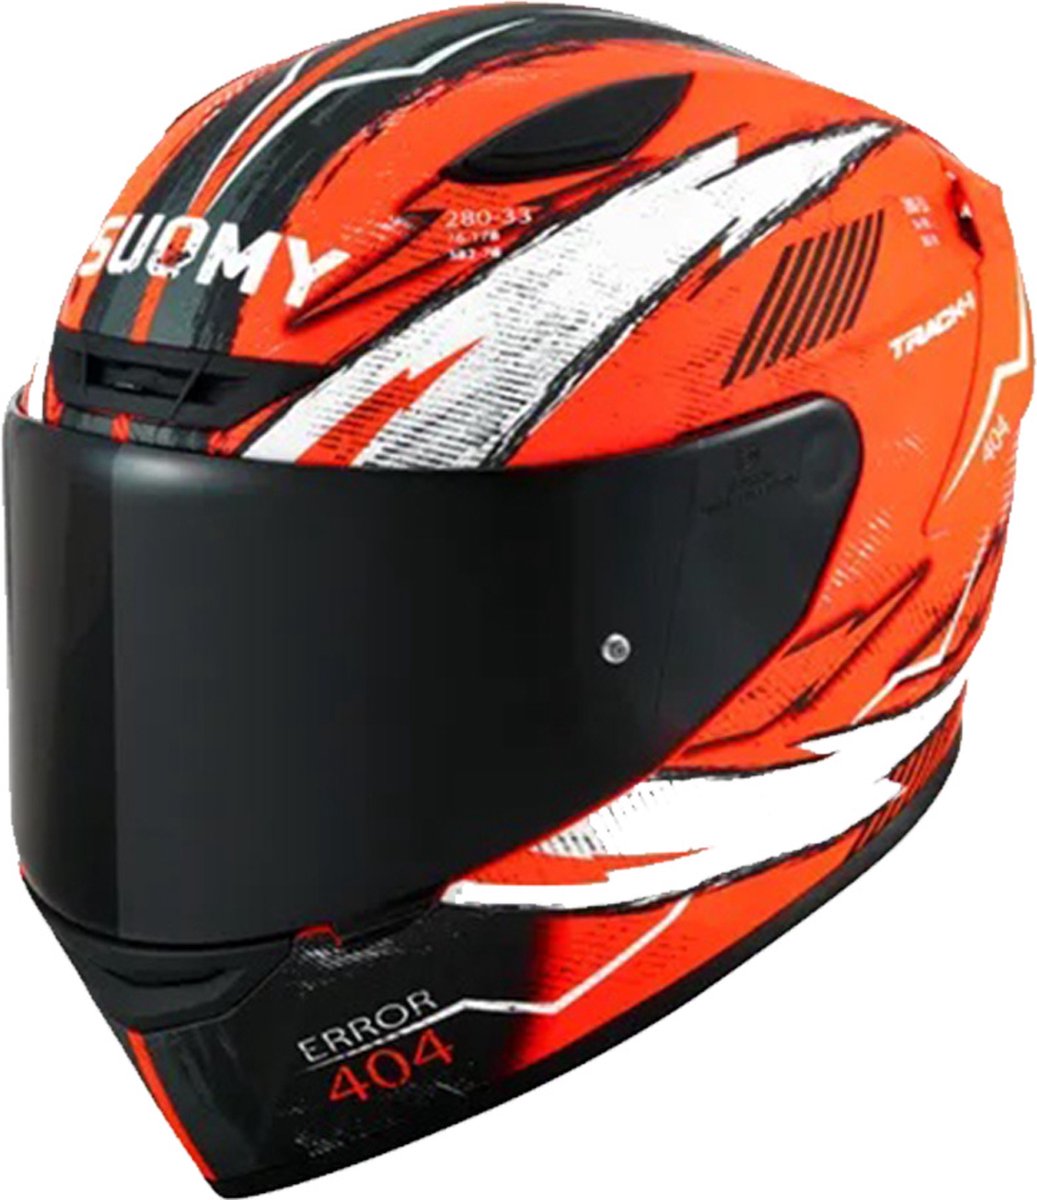 Suomy Track 1 404 Ece 22.06 Red White S - Maat S - Helm